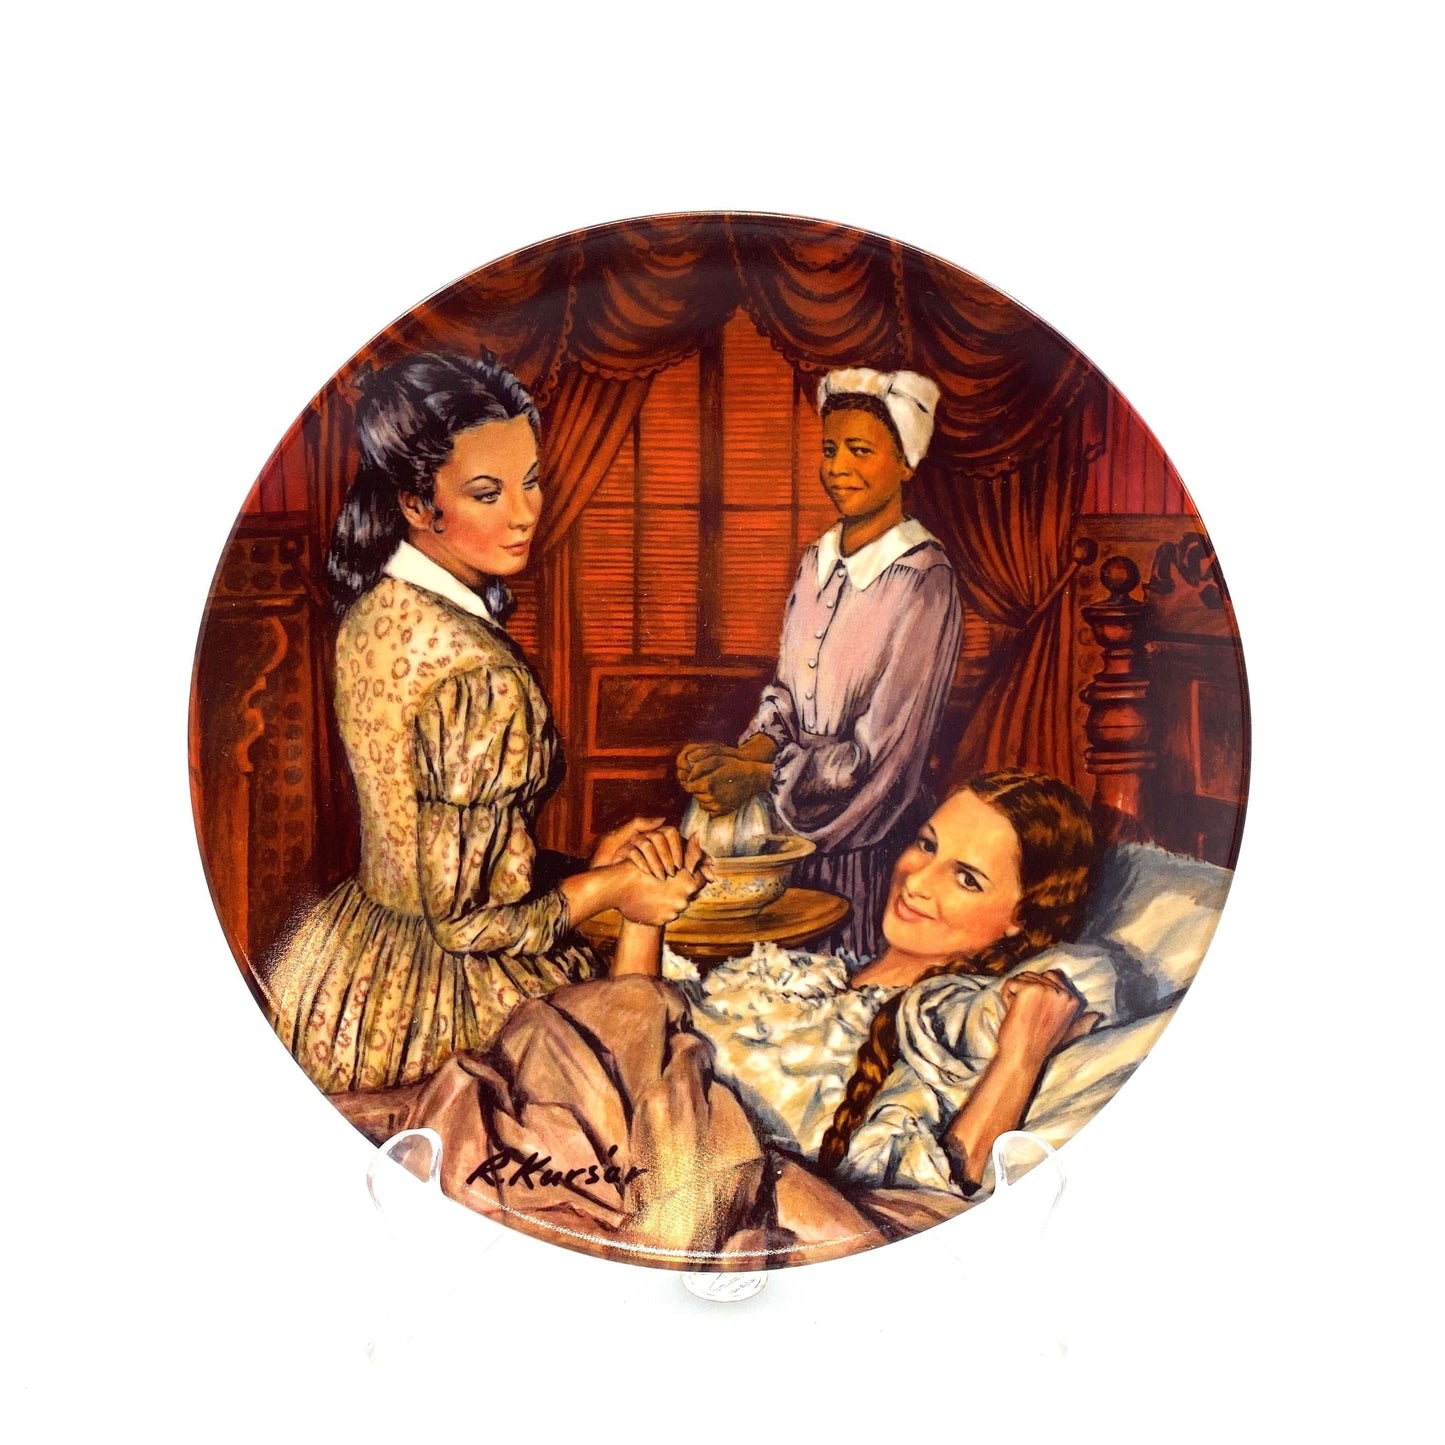 “Melanie Gives Birth” MGM Gone With The Wind 1983 Collectors Plate by Raymond Kursar